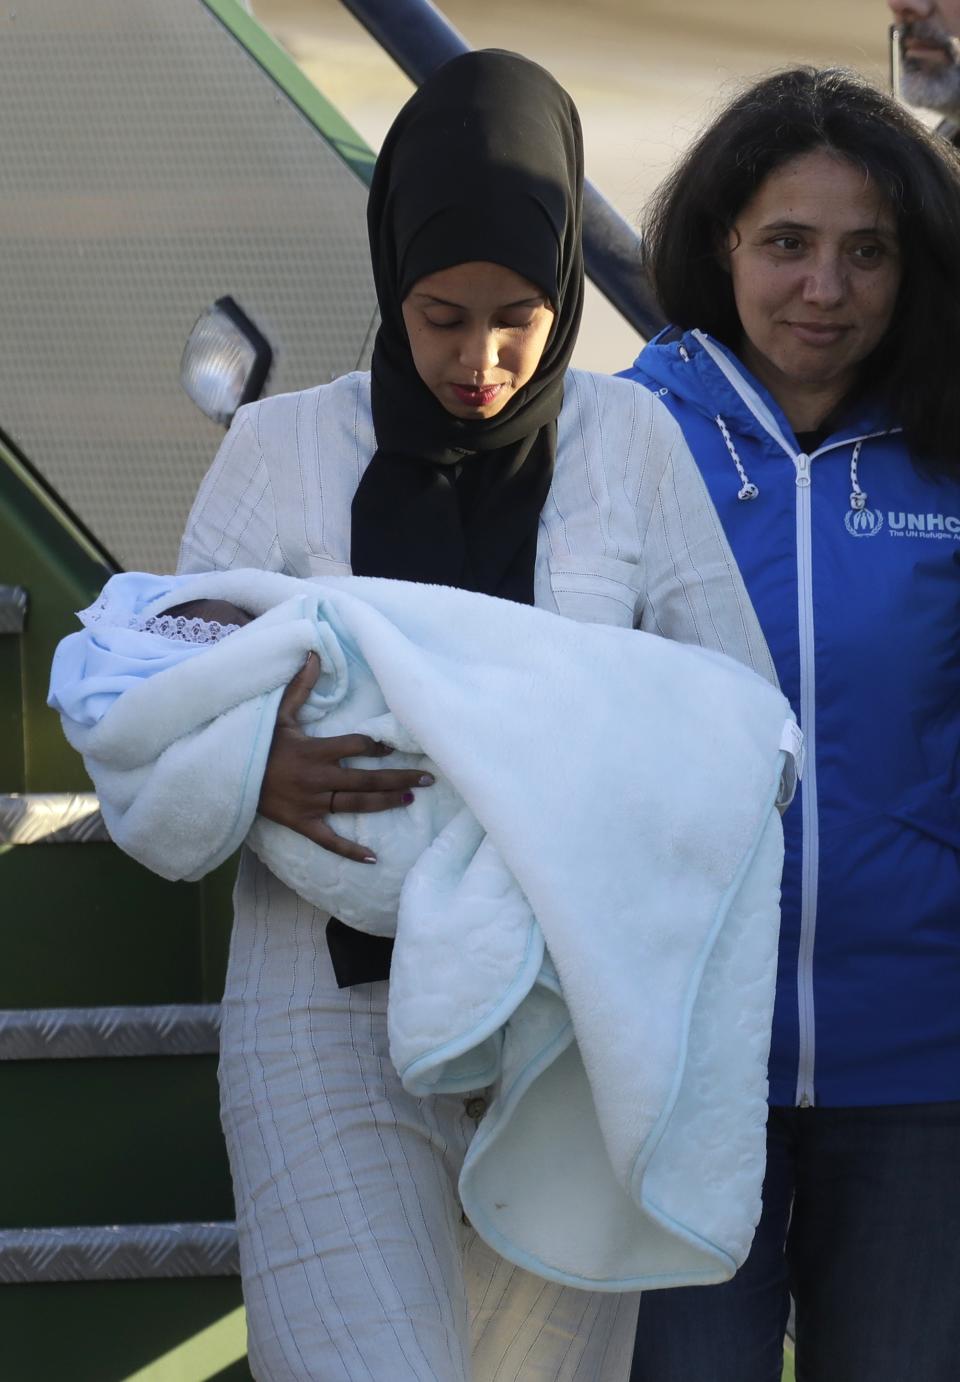 A woman holding a baby disembarks from an Italian military aircraft arriving from Misrata, Libya, at Pratica di Mare military airport, near Rome, Monday, April 29, 2019. Italy organized a humanitarian evacuation airlift for a group of 147 asylum seekers from Ethiopia, Eritrea, Somalia, Sudan and Syria. (AP Photo/Andrew Medichini)